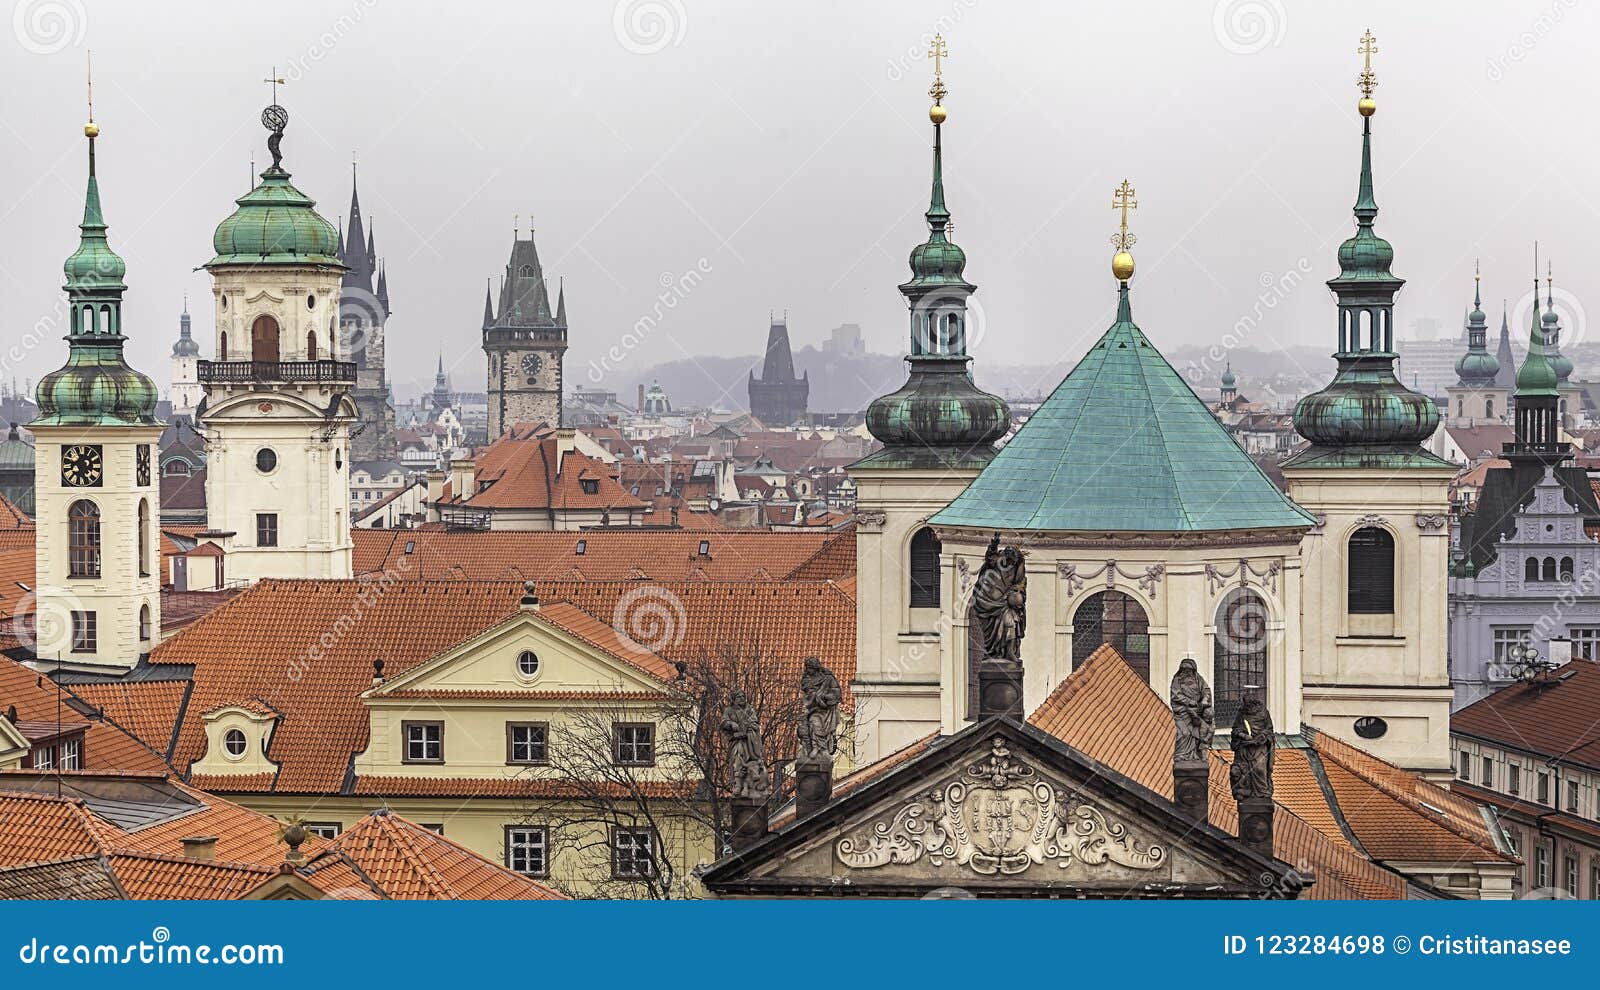 Prague, the City of a Hundred Spires Stock Photo - Image of buildings